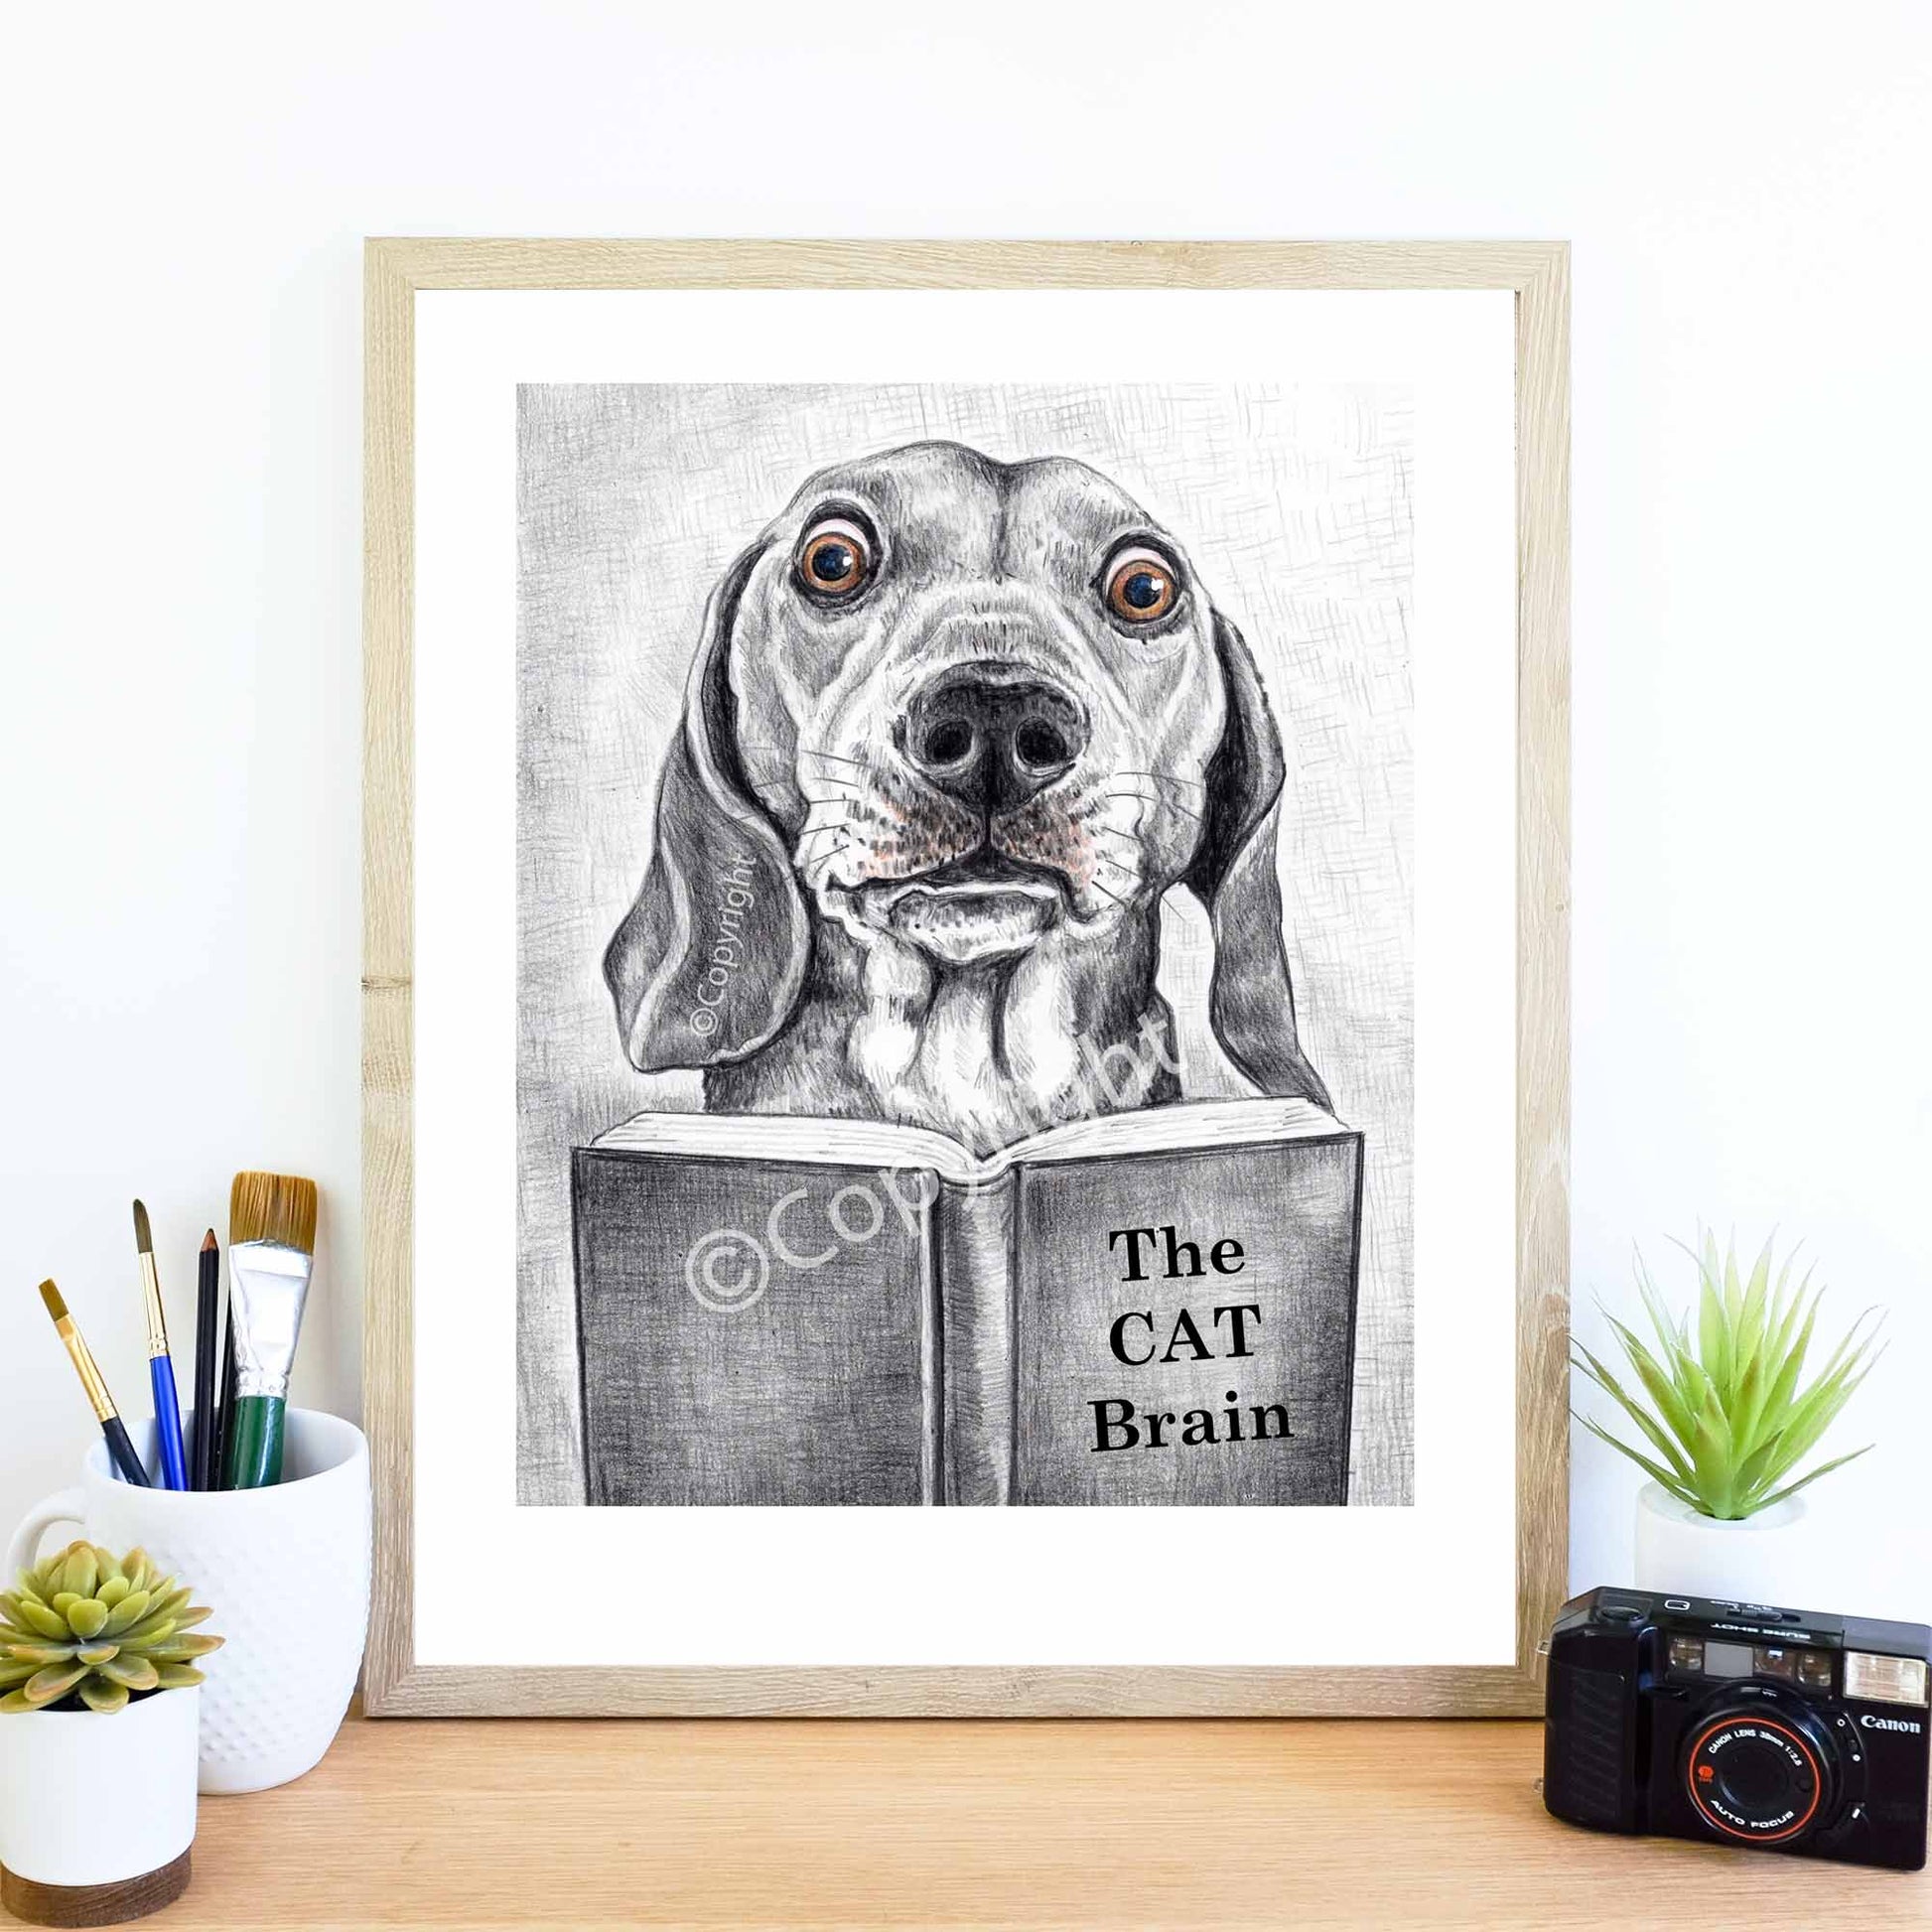 Crayon drawing of a dachshund dog reading a book about cats. Black and white art by Deidre Wicks